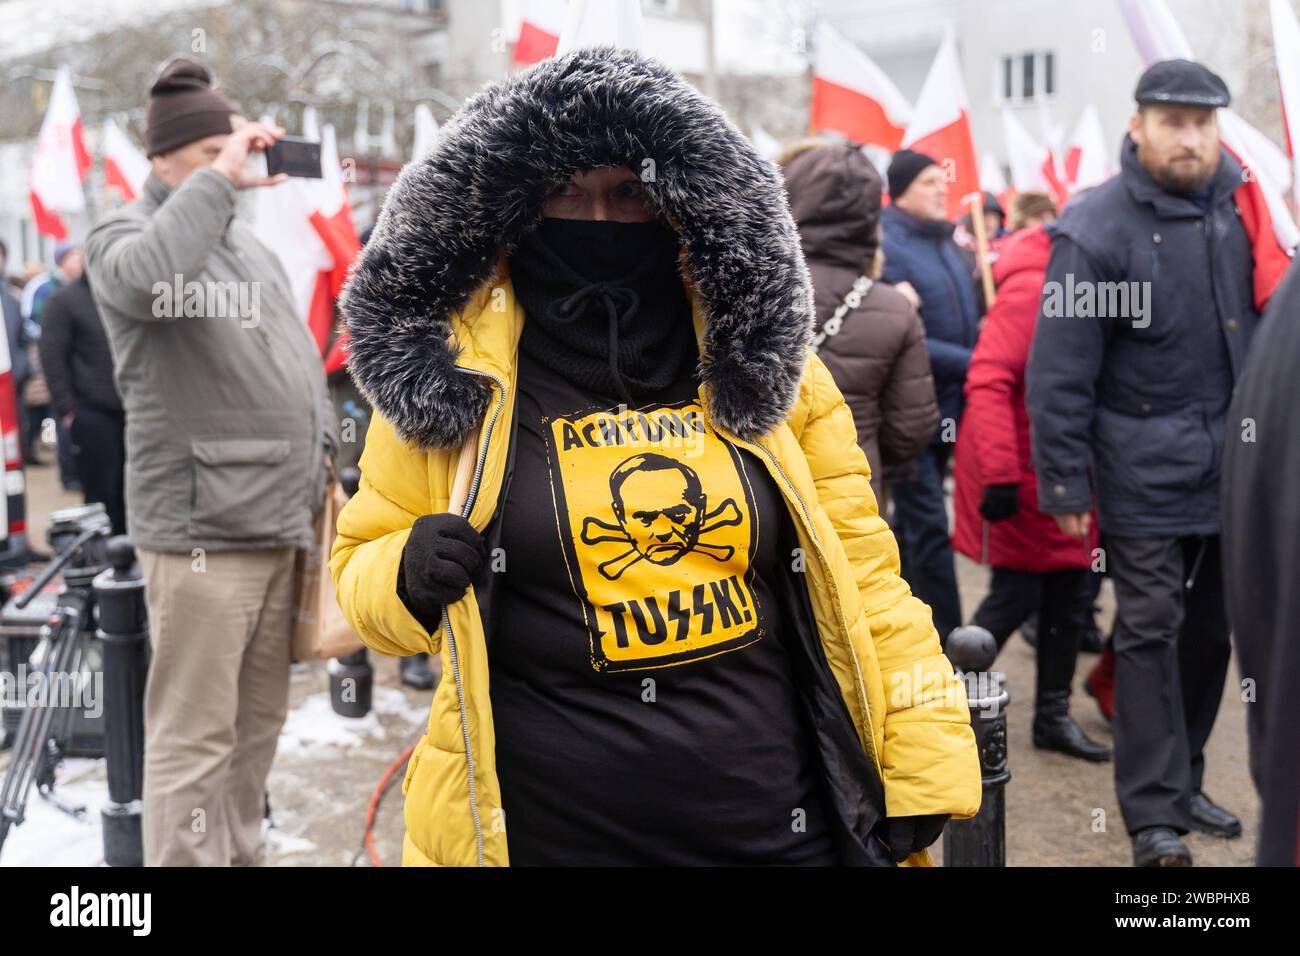 A women wearing sweatshirt with the inscription ACHTUNG WHERE THE LETTERS ARE SHOWN AS THE Emblem of the SS Schutzstaffel at a rally in front of the Polish Parliament in Warsaw, January 11, 2024. Thousands of people gathered in front of the Sejm to protest against the pro-European coalition led by Donald Tusk, demanding the release of PiS PiS MPs Mariusz Kaminski and Maciej Wasik and the return of state media to PiS influence. Warsaw Poland Anti-Governmental Protest In Warsaw 2024/01/11 Copyright: xMarekxAntonixIwanczukx MAI09674 Stock Photo